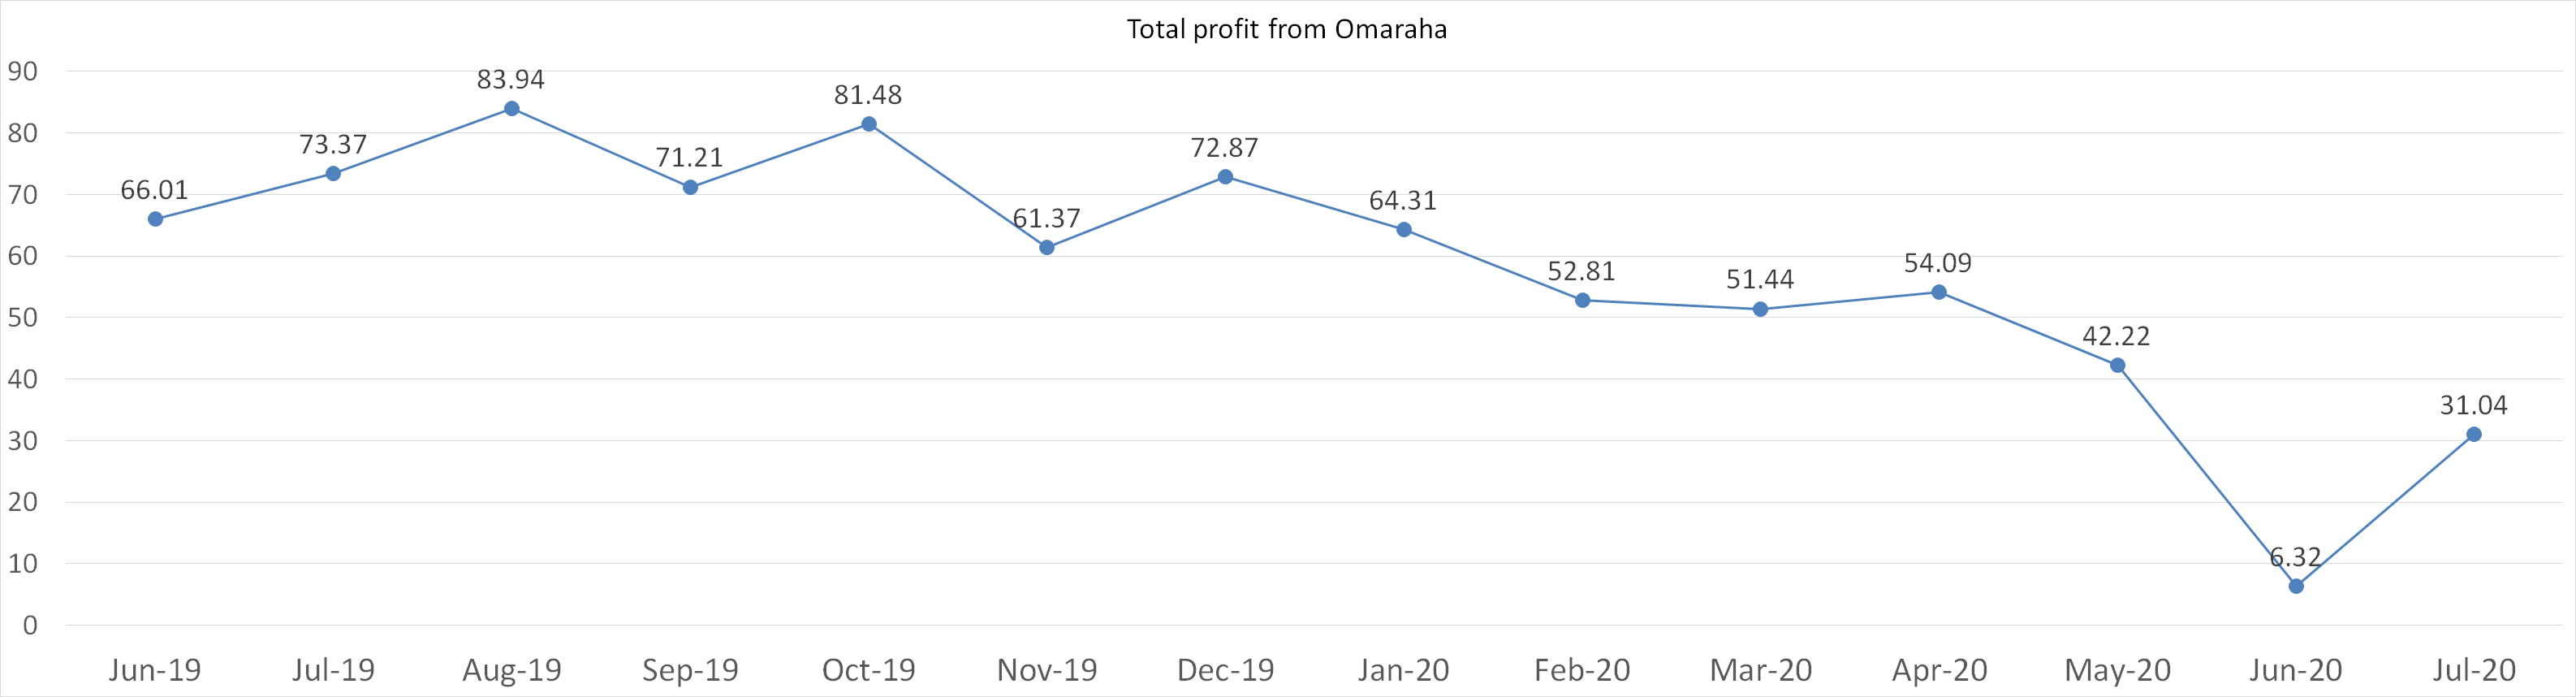 Total profit from Omaraha july 2020